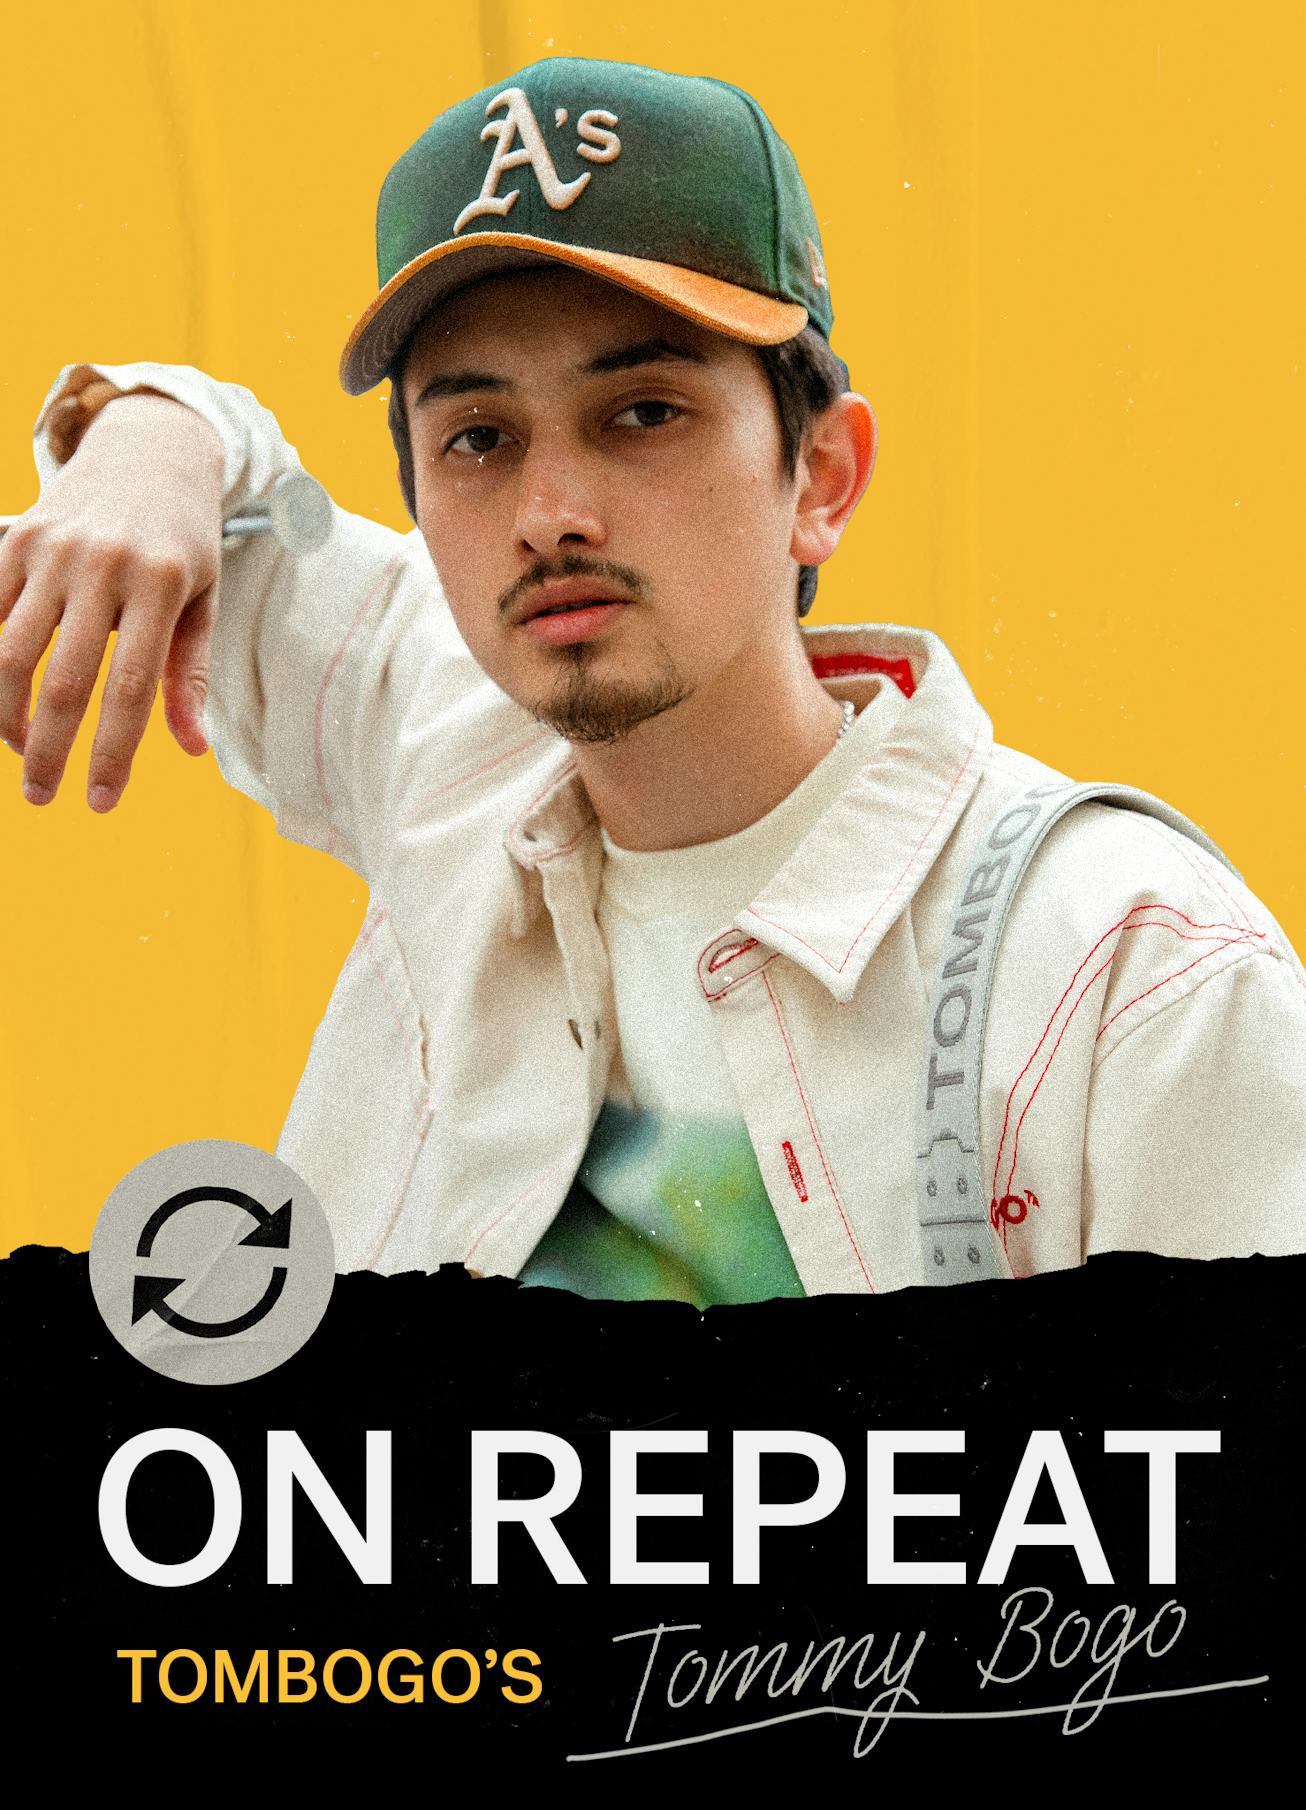 Poster of Tommy Bogo next to the words "On repeat" 